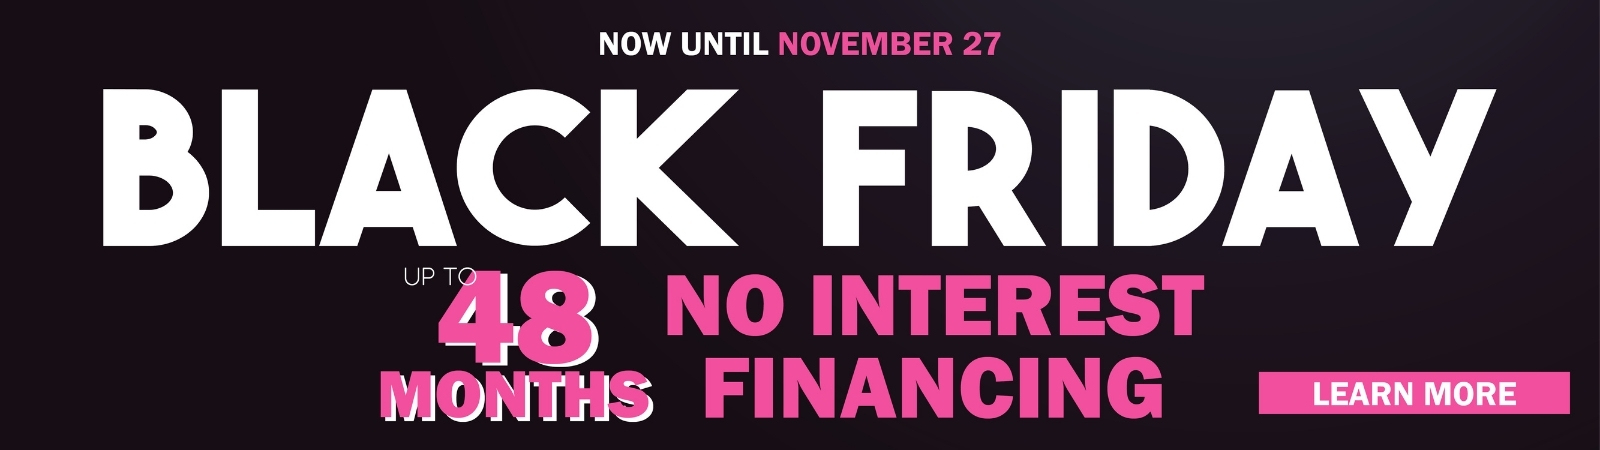 INTEREST FREE FINANCING - DON'T MISS!